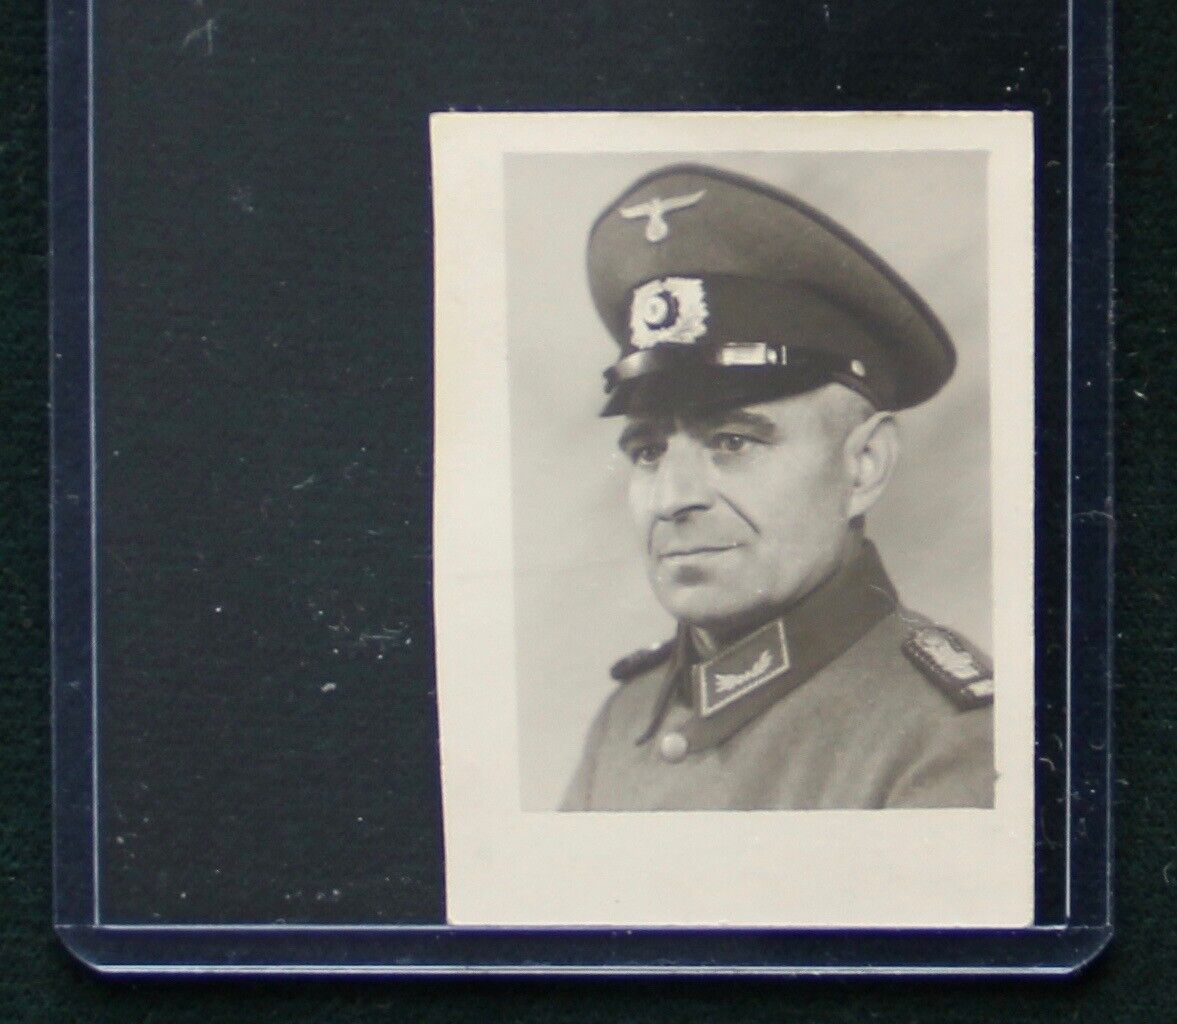 WWII German Photo Zoll Assistant Customs Official Portrait ID size 1 7/8x2 9/16